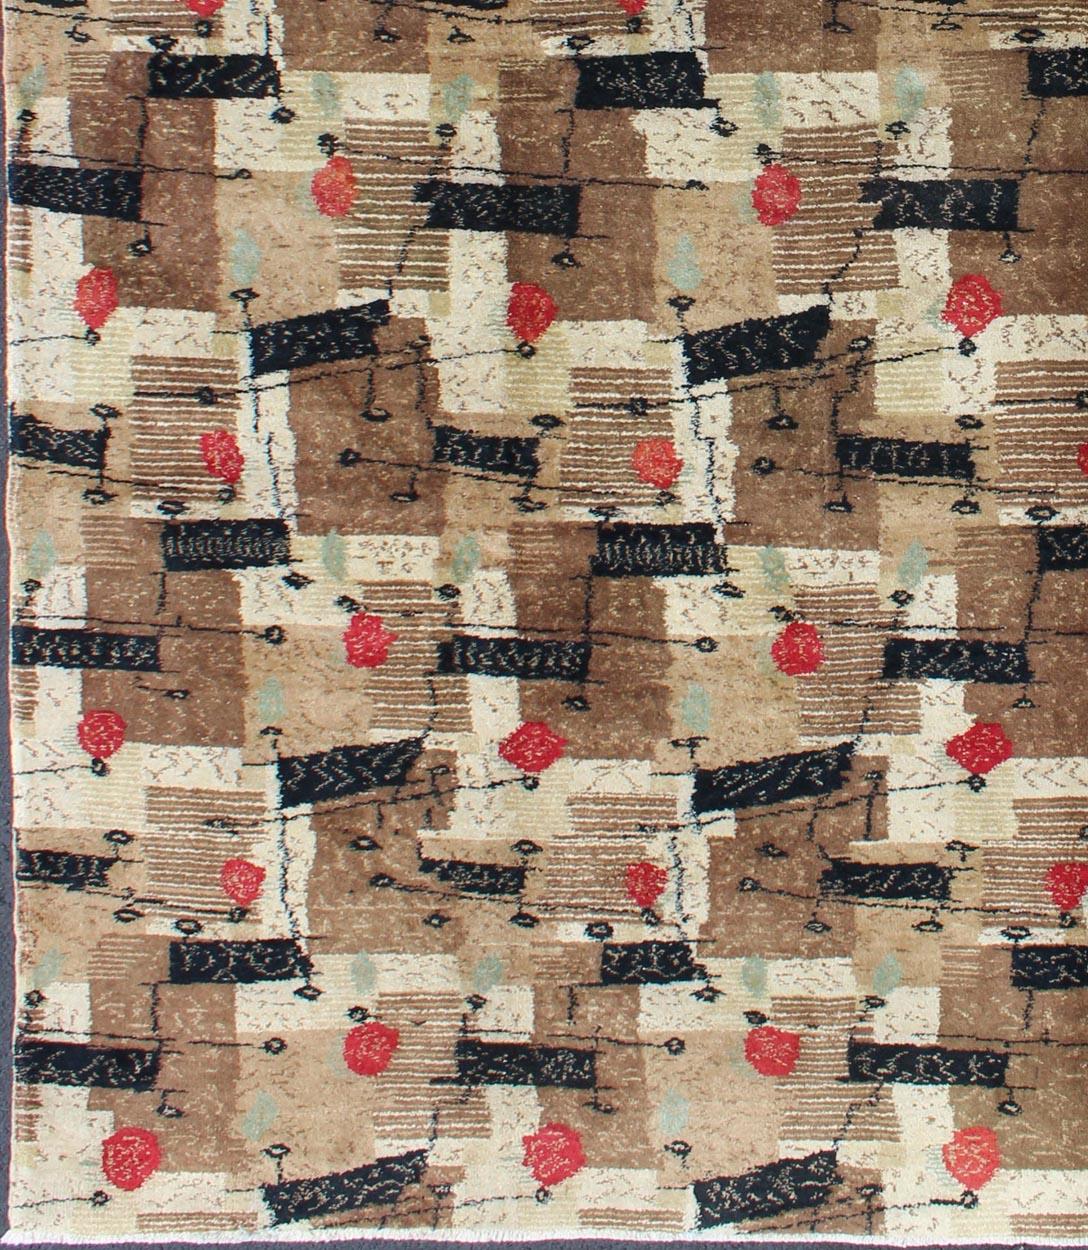 Mid-Century Modern rug with jagged stripes and blocks design in brown and red, rug mtu-3314, country of origin / type: Turkey / Oushak, circa mid-20th century.

This rug captures the spirit of the Mid-Century Modern movement with its graphic